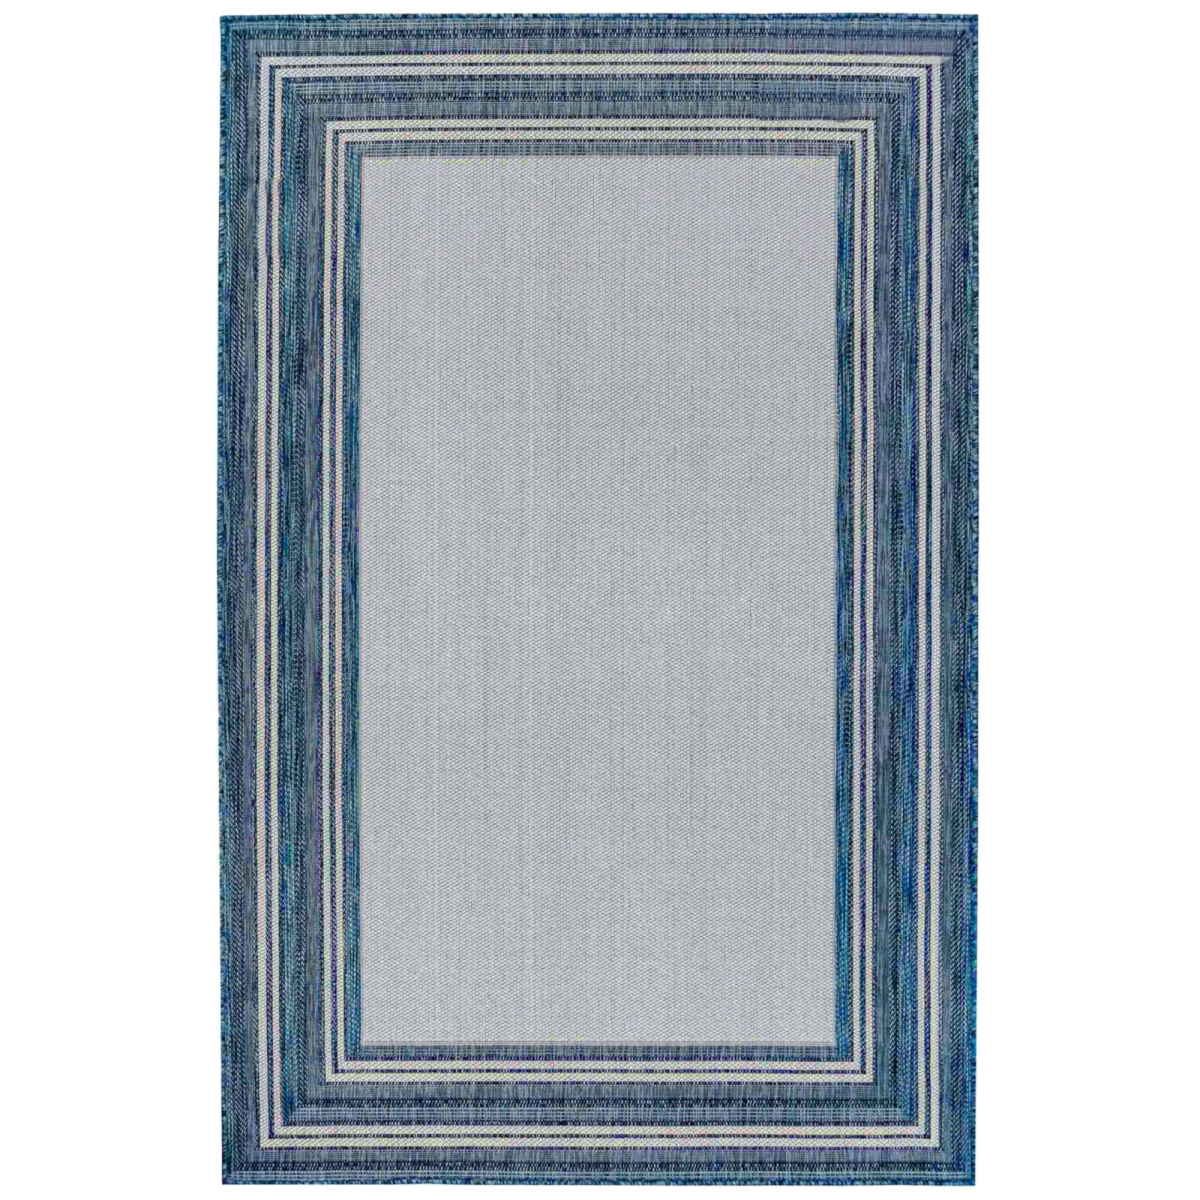 Trans-ocean Imports Cre45842533 39 In. X 59 In. Liora Manne Carmel Multi Border Indoor & Outdoor Wilton Woven Rectangle Rug - Navy